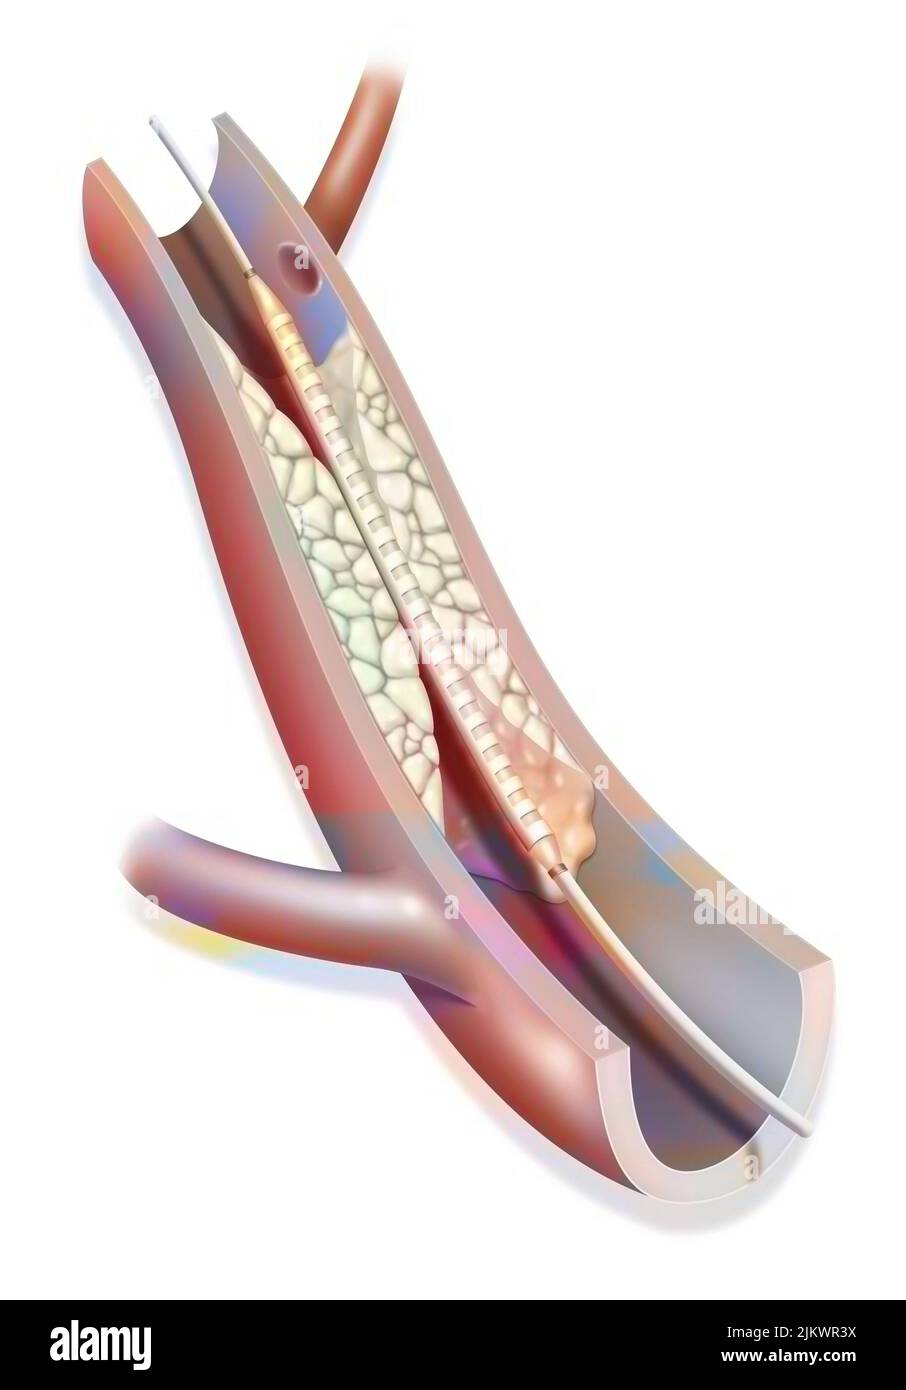 Angioplasty (stenting) helps restore blood flow to an artery blocked by an atheroma. Stock Photo